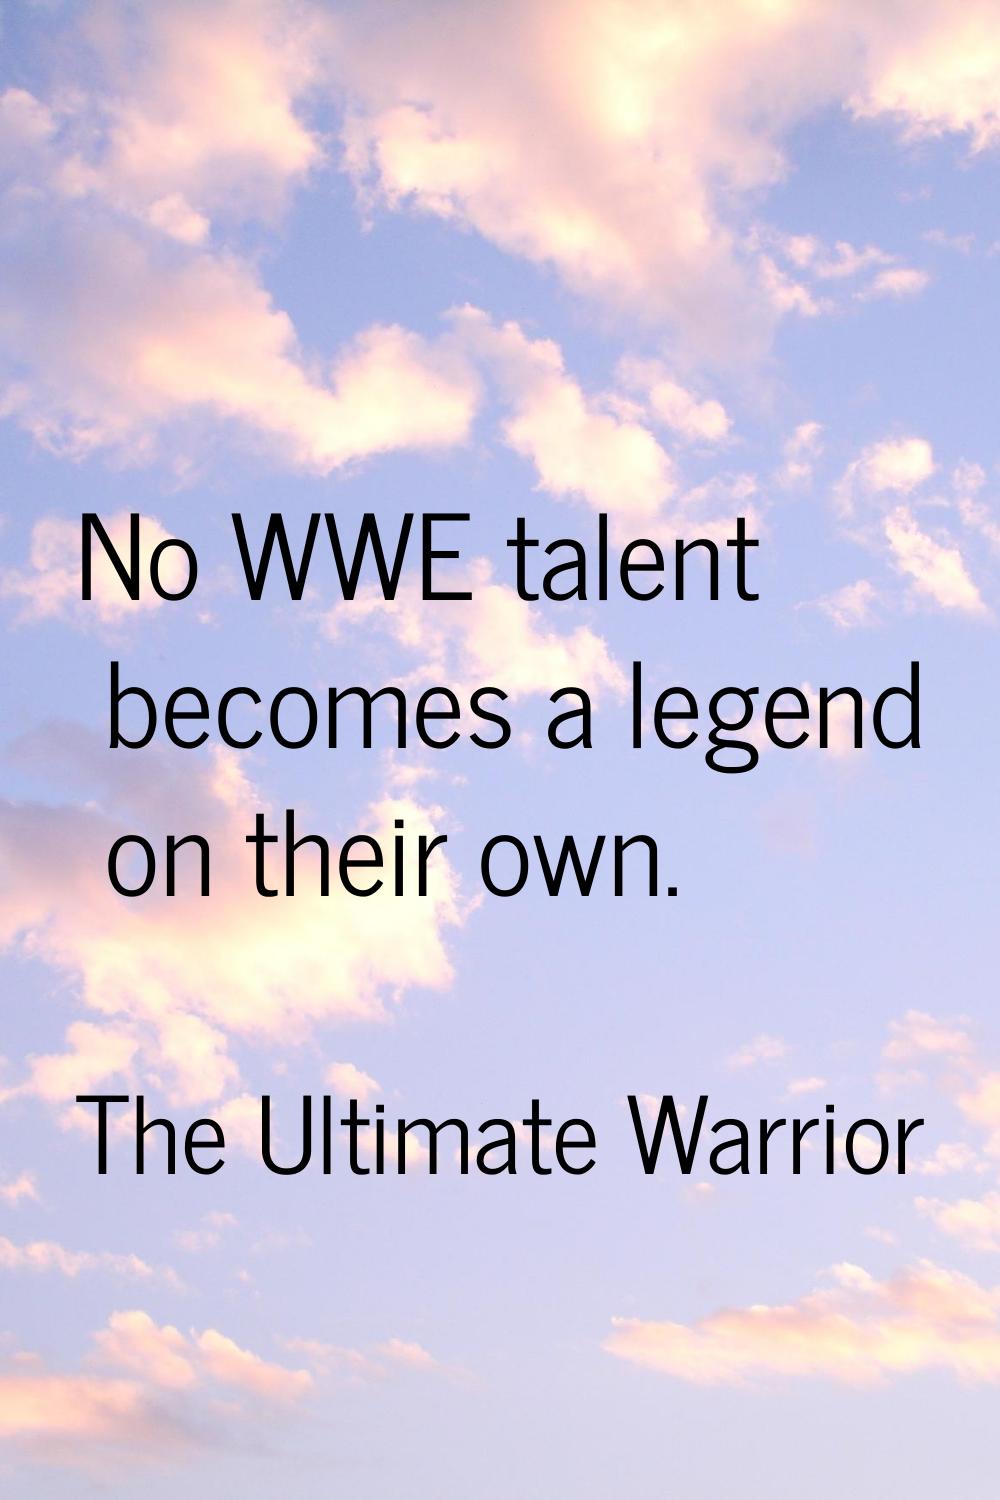 No WWE talent becomes a legend on their own.